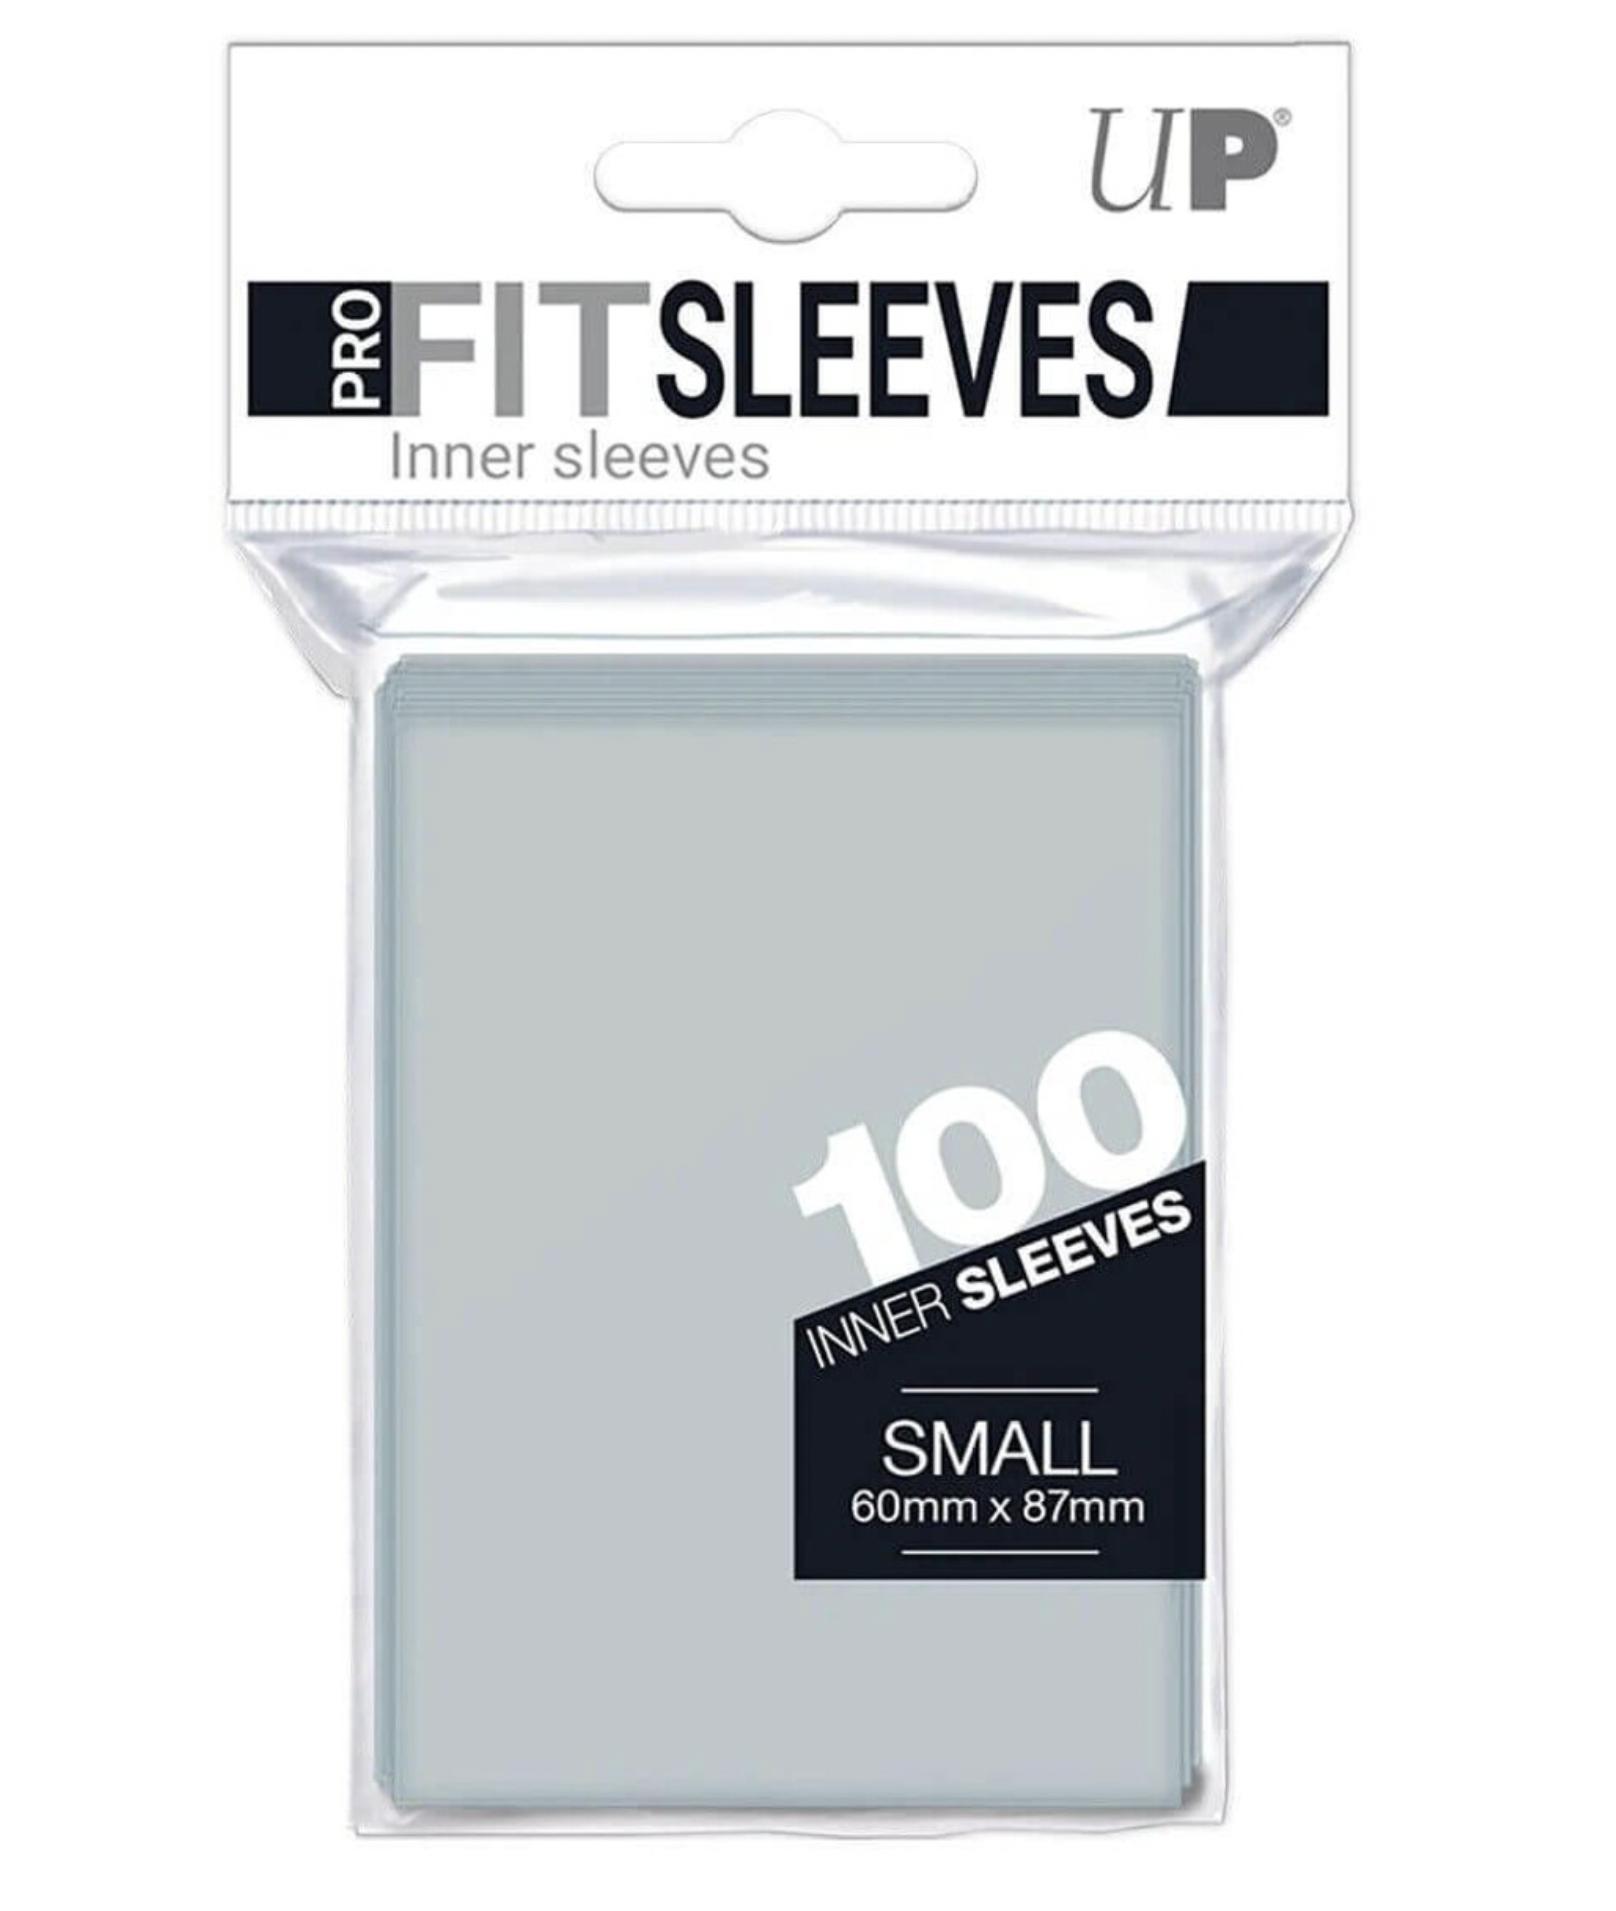 Ultra Pro - Pro Fit Sleeves, Small 60 x 87mm (100 Sleeves)